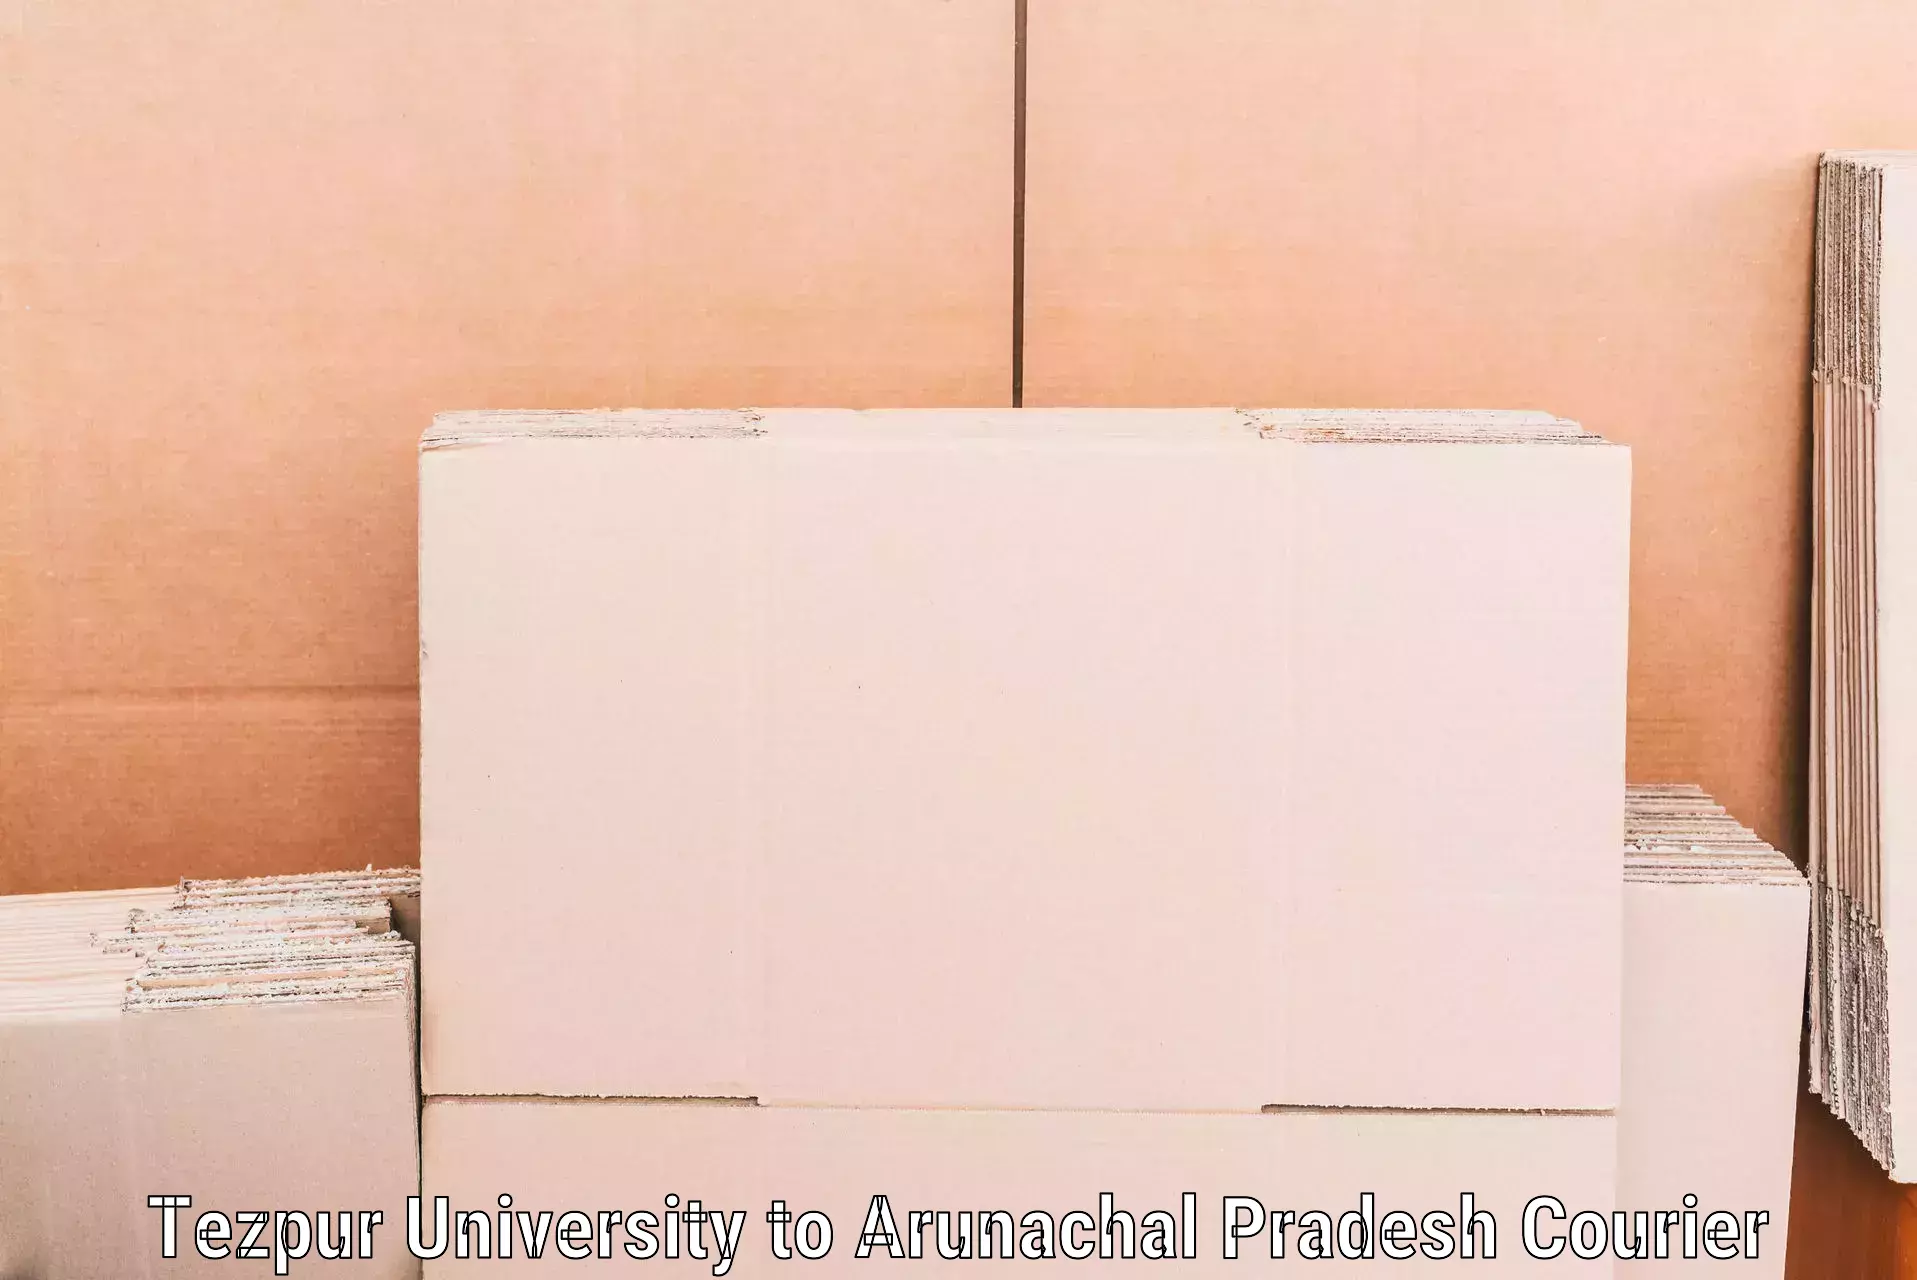 Professional moving assistance Tezpur University to Dirang